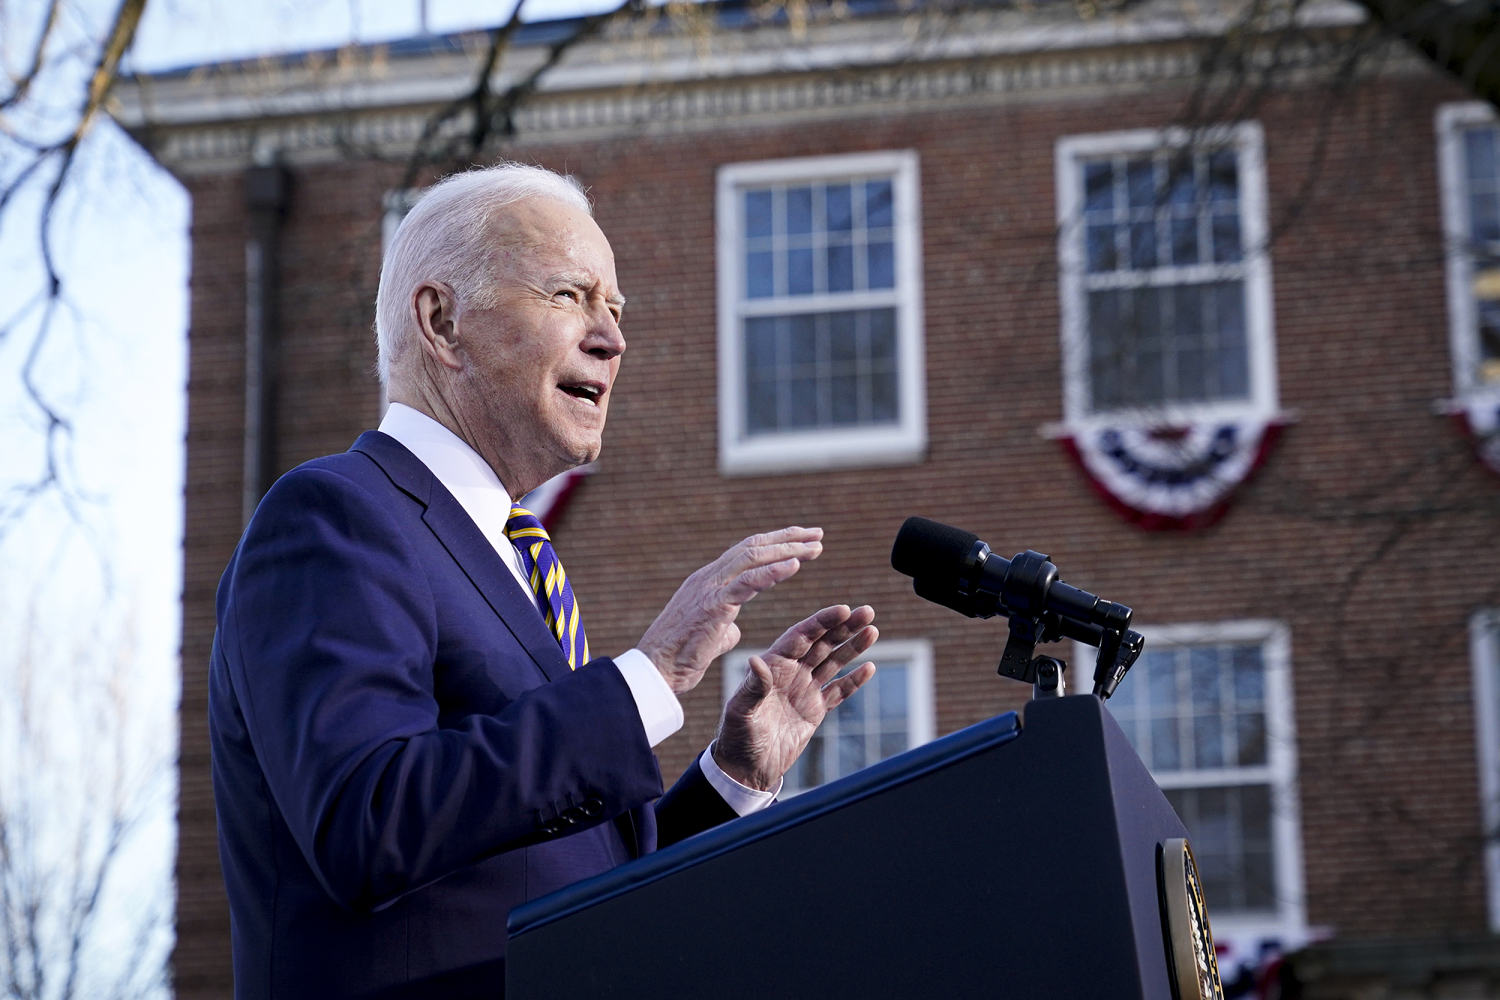 Students at MLK’s alma mater are outraged over Biden’s visit. Listen to them.